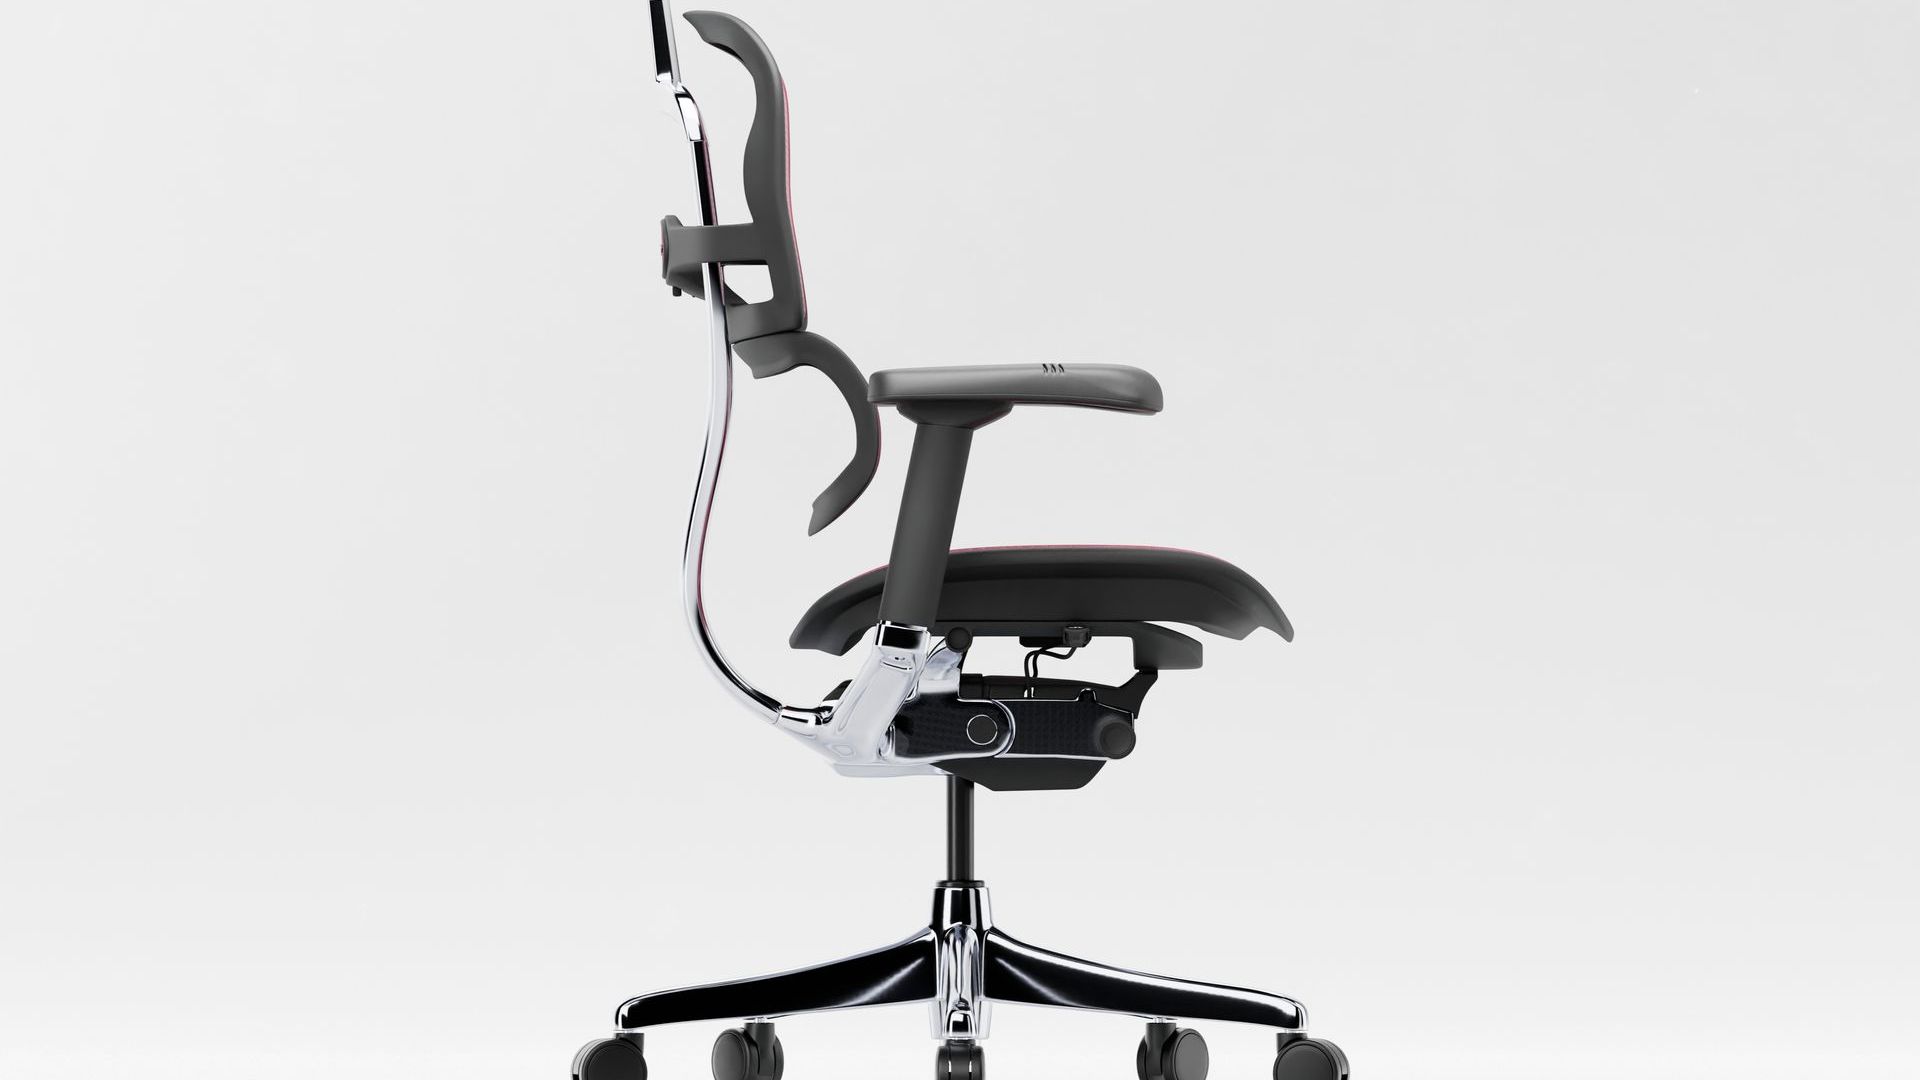 Right profile view of the Ergohuman Elite with a black frame; the chair is situated against a white backdrop. 